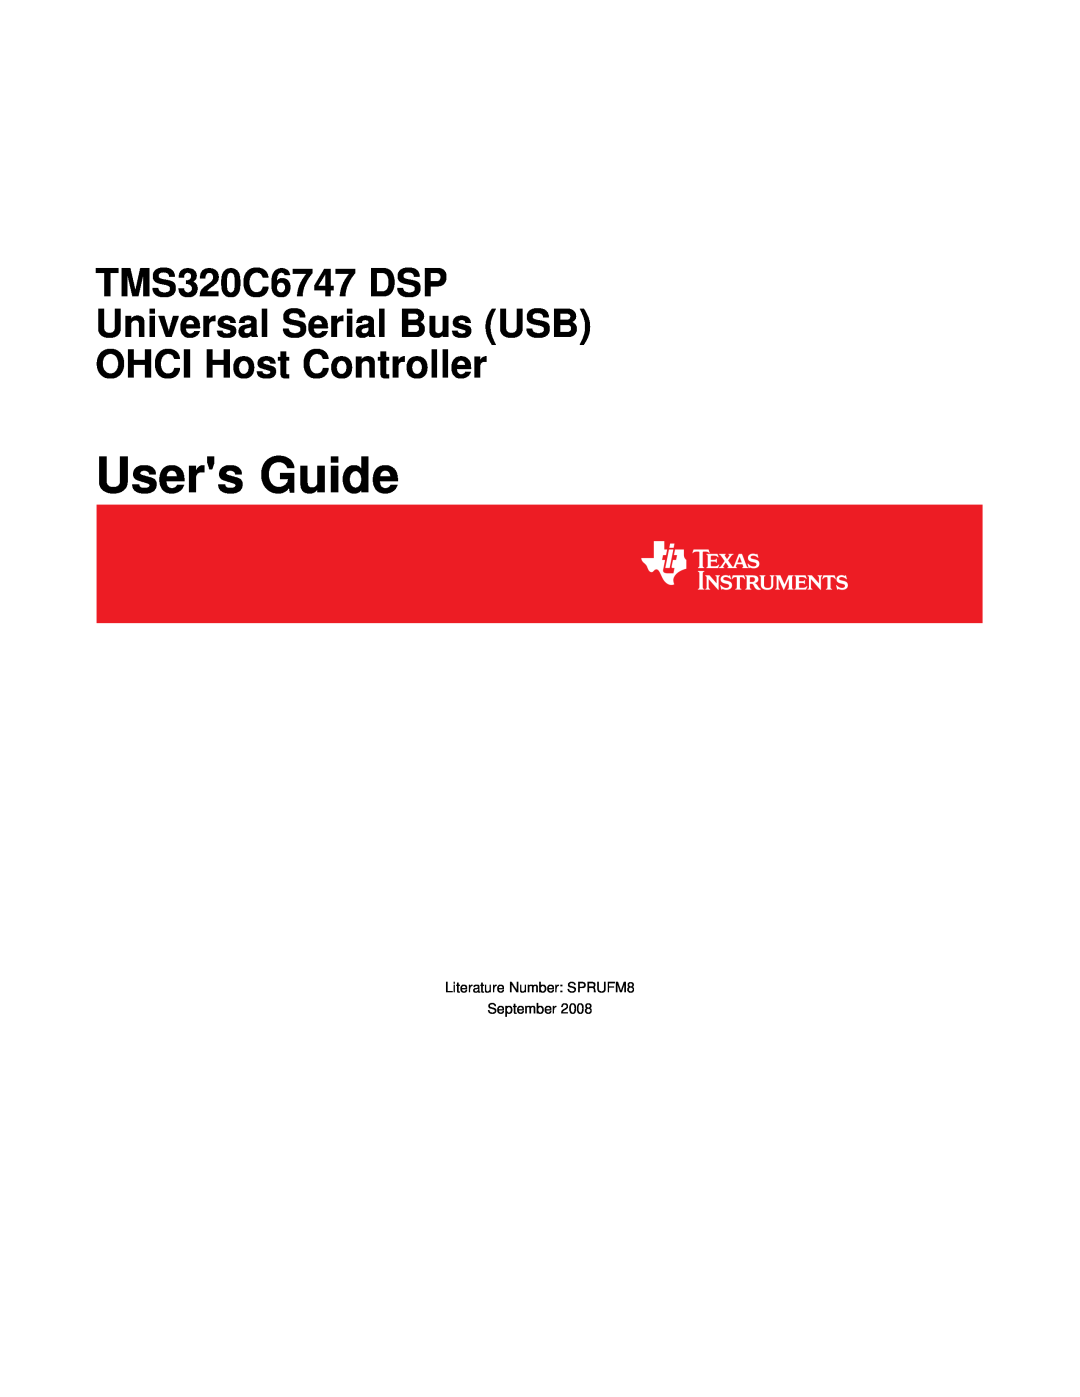 Texas Instruments manual Users Guide, TMS320C6747 DSP Universal Serial Bus USB OHCI Host Controller 